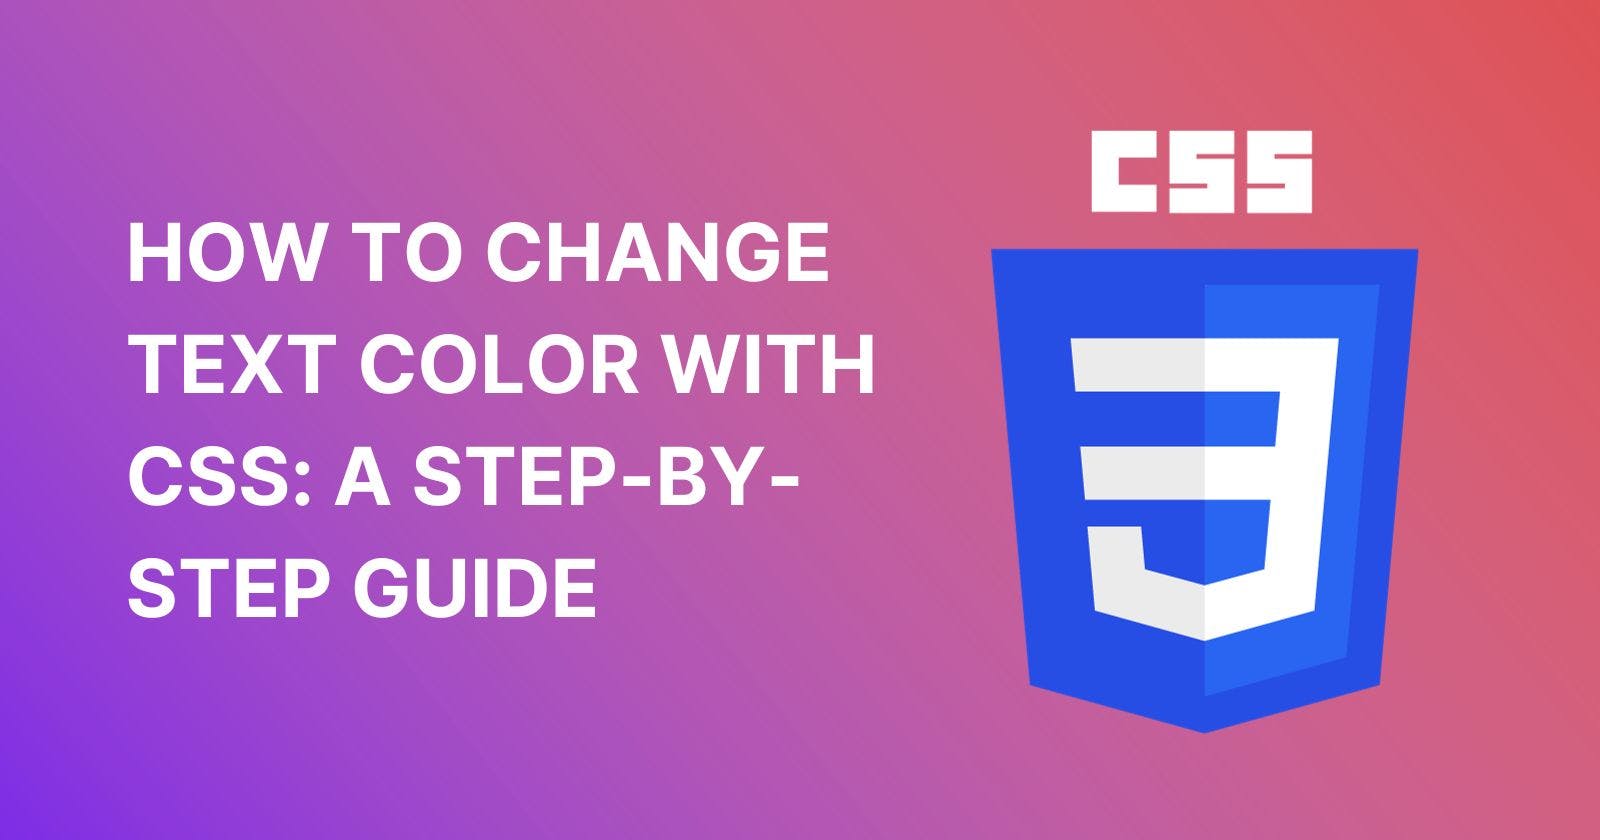 How to Change Text Color with CSS: A Step-by-Step Guide